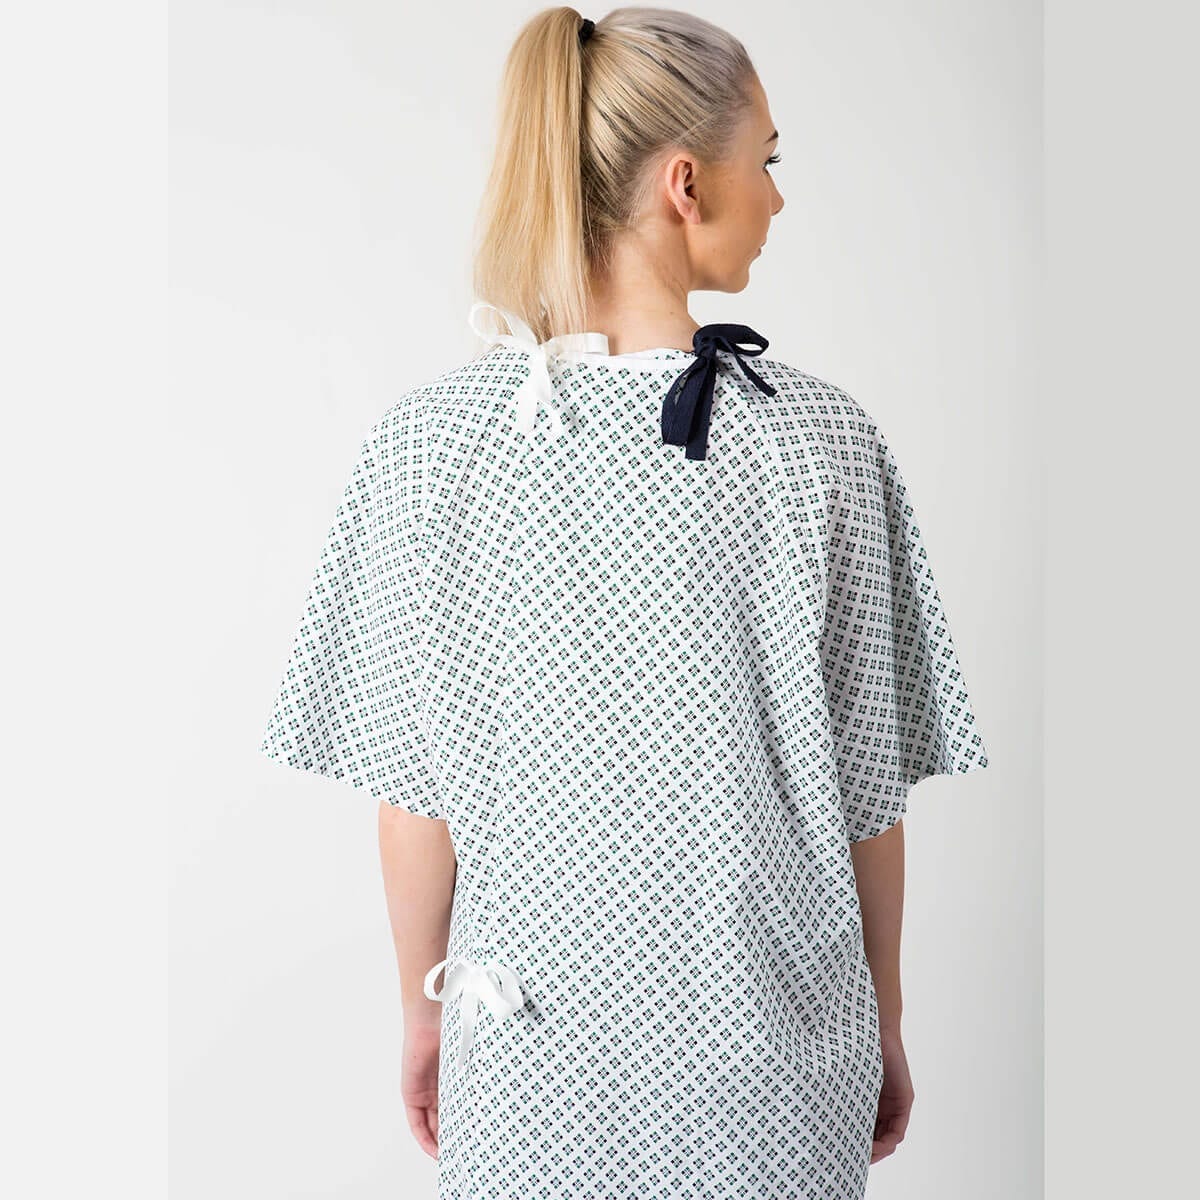 Hospital lapover gown - rear view